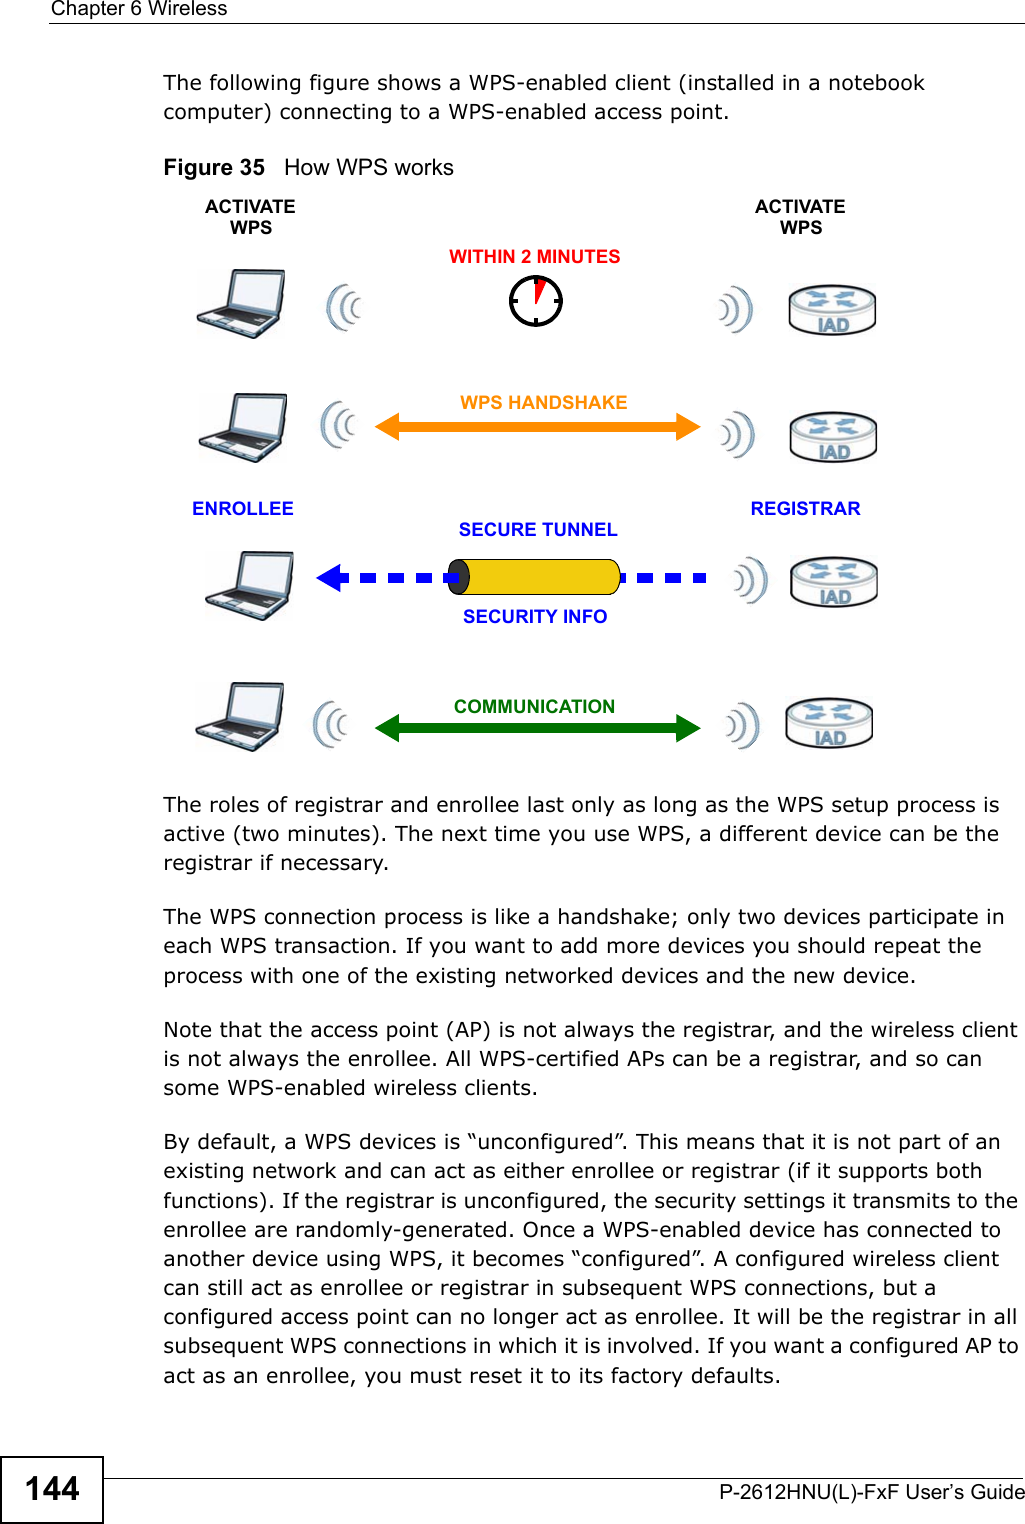 Chapter 6 WirelessP-2612HNU(L)-FxF User’s Guide144The following figure shows a WPS-enabled client (installed in a notebook computer) connecting to a WPS-enabled access point.Figure 35   How WPS worksThe roles of registrar and enrollee last only as long as the WPS setup process is active (two minutes). The next time you use WPS, a different device can be the registrar if necessary.The WPS connection process is like a handshake; only two devices participate in each WPS transaction. If you want to add more devices you should repeat the process with one of the existing networked devices and the new device.Note that the access point (AP) is not always the registrar, and the wireless client is not always the enrollee. All WPS-certified APs can be a registrar, and so can some WPS-enabled wireless clients.By default, a WPS devices is “unconfigured”. This means that it is not part of an existing network and can act as either enrollee or registrar (if it supports both functions). If the registrar is unconfigured, the security settings it transmits to the enrollee are randomly-generated. Once a WPS-enabled device has connected toanother device using WPS, it becomes “configured”. A configured wireless client can still act as enrollee or registrar in subsequent WPS connections, but a configured access point can no longer act as enrollee. It will be the registrar in allsubsequent WPS connections in which it is involved. If you want a configured AP to act as an enrollee, you must reset it to its factory defaults.SECURE TUNNELSECURITY INFOWITHIN 2 MINUTESCOMMUNICATIONACTIVATEWPSACTIVATEWPSWPS HANDSHAKEREGISTRARENROLLEE